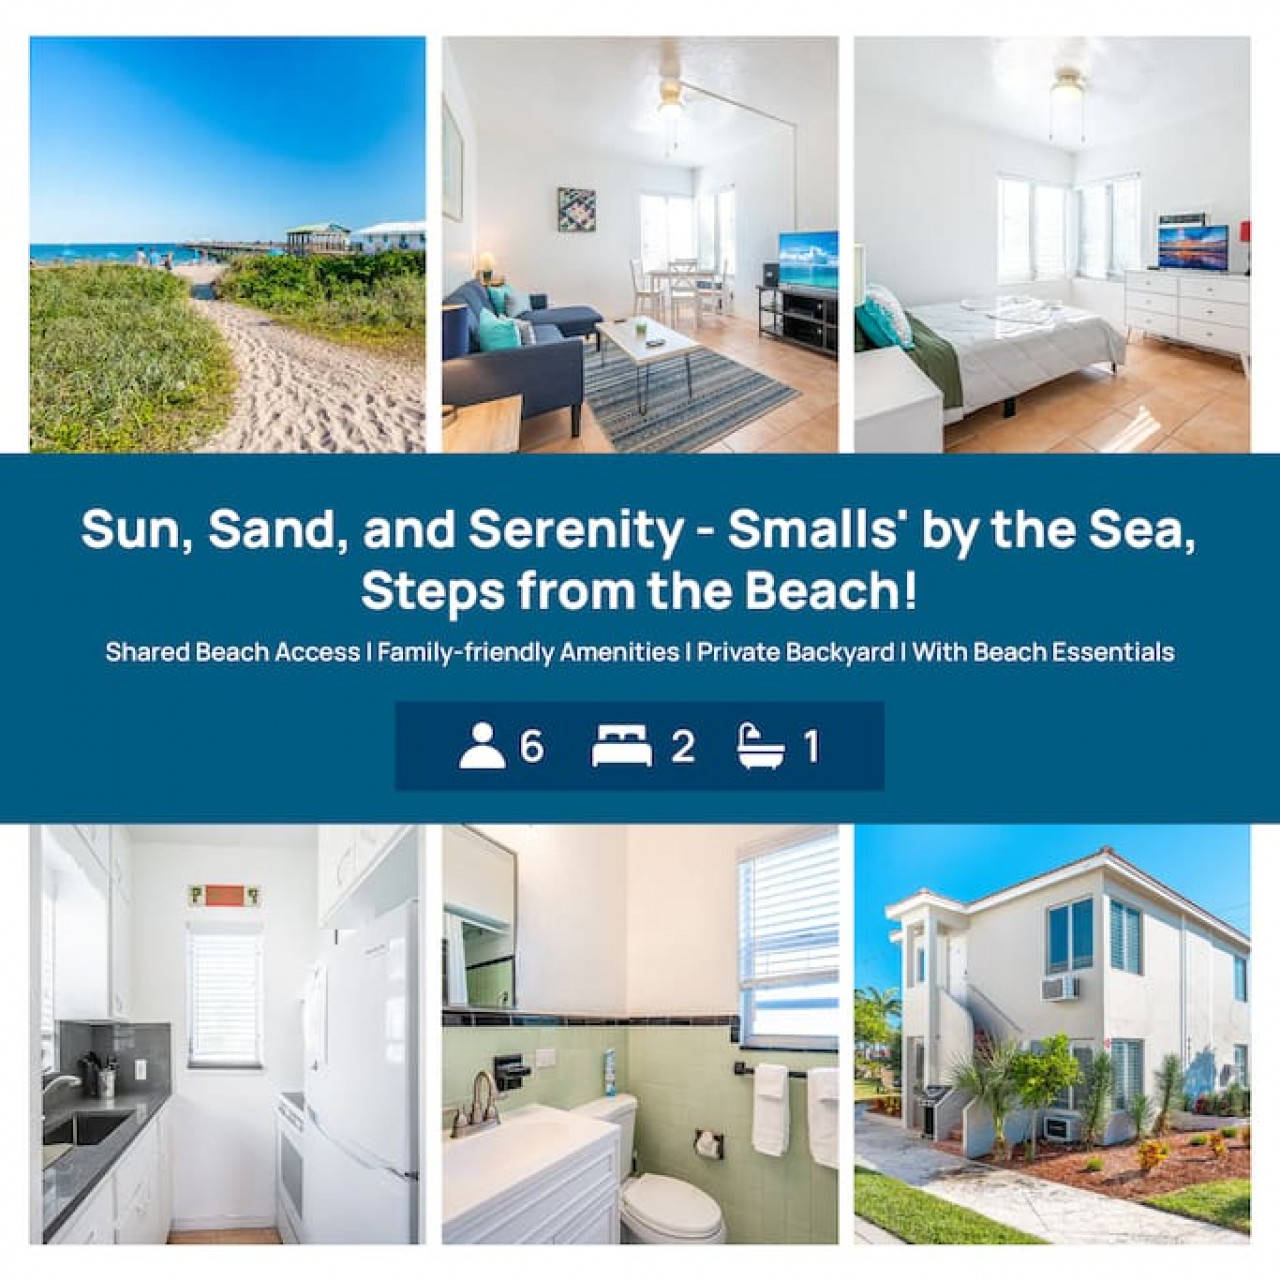 Lauderdale-by-the-Sea Vacation Rental